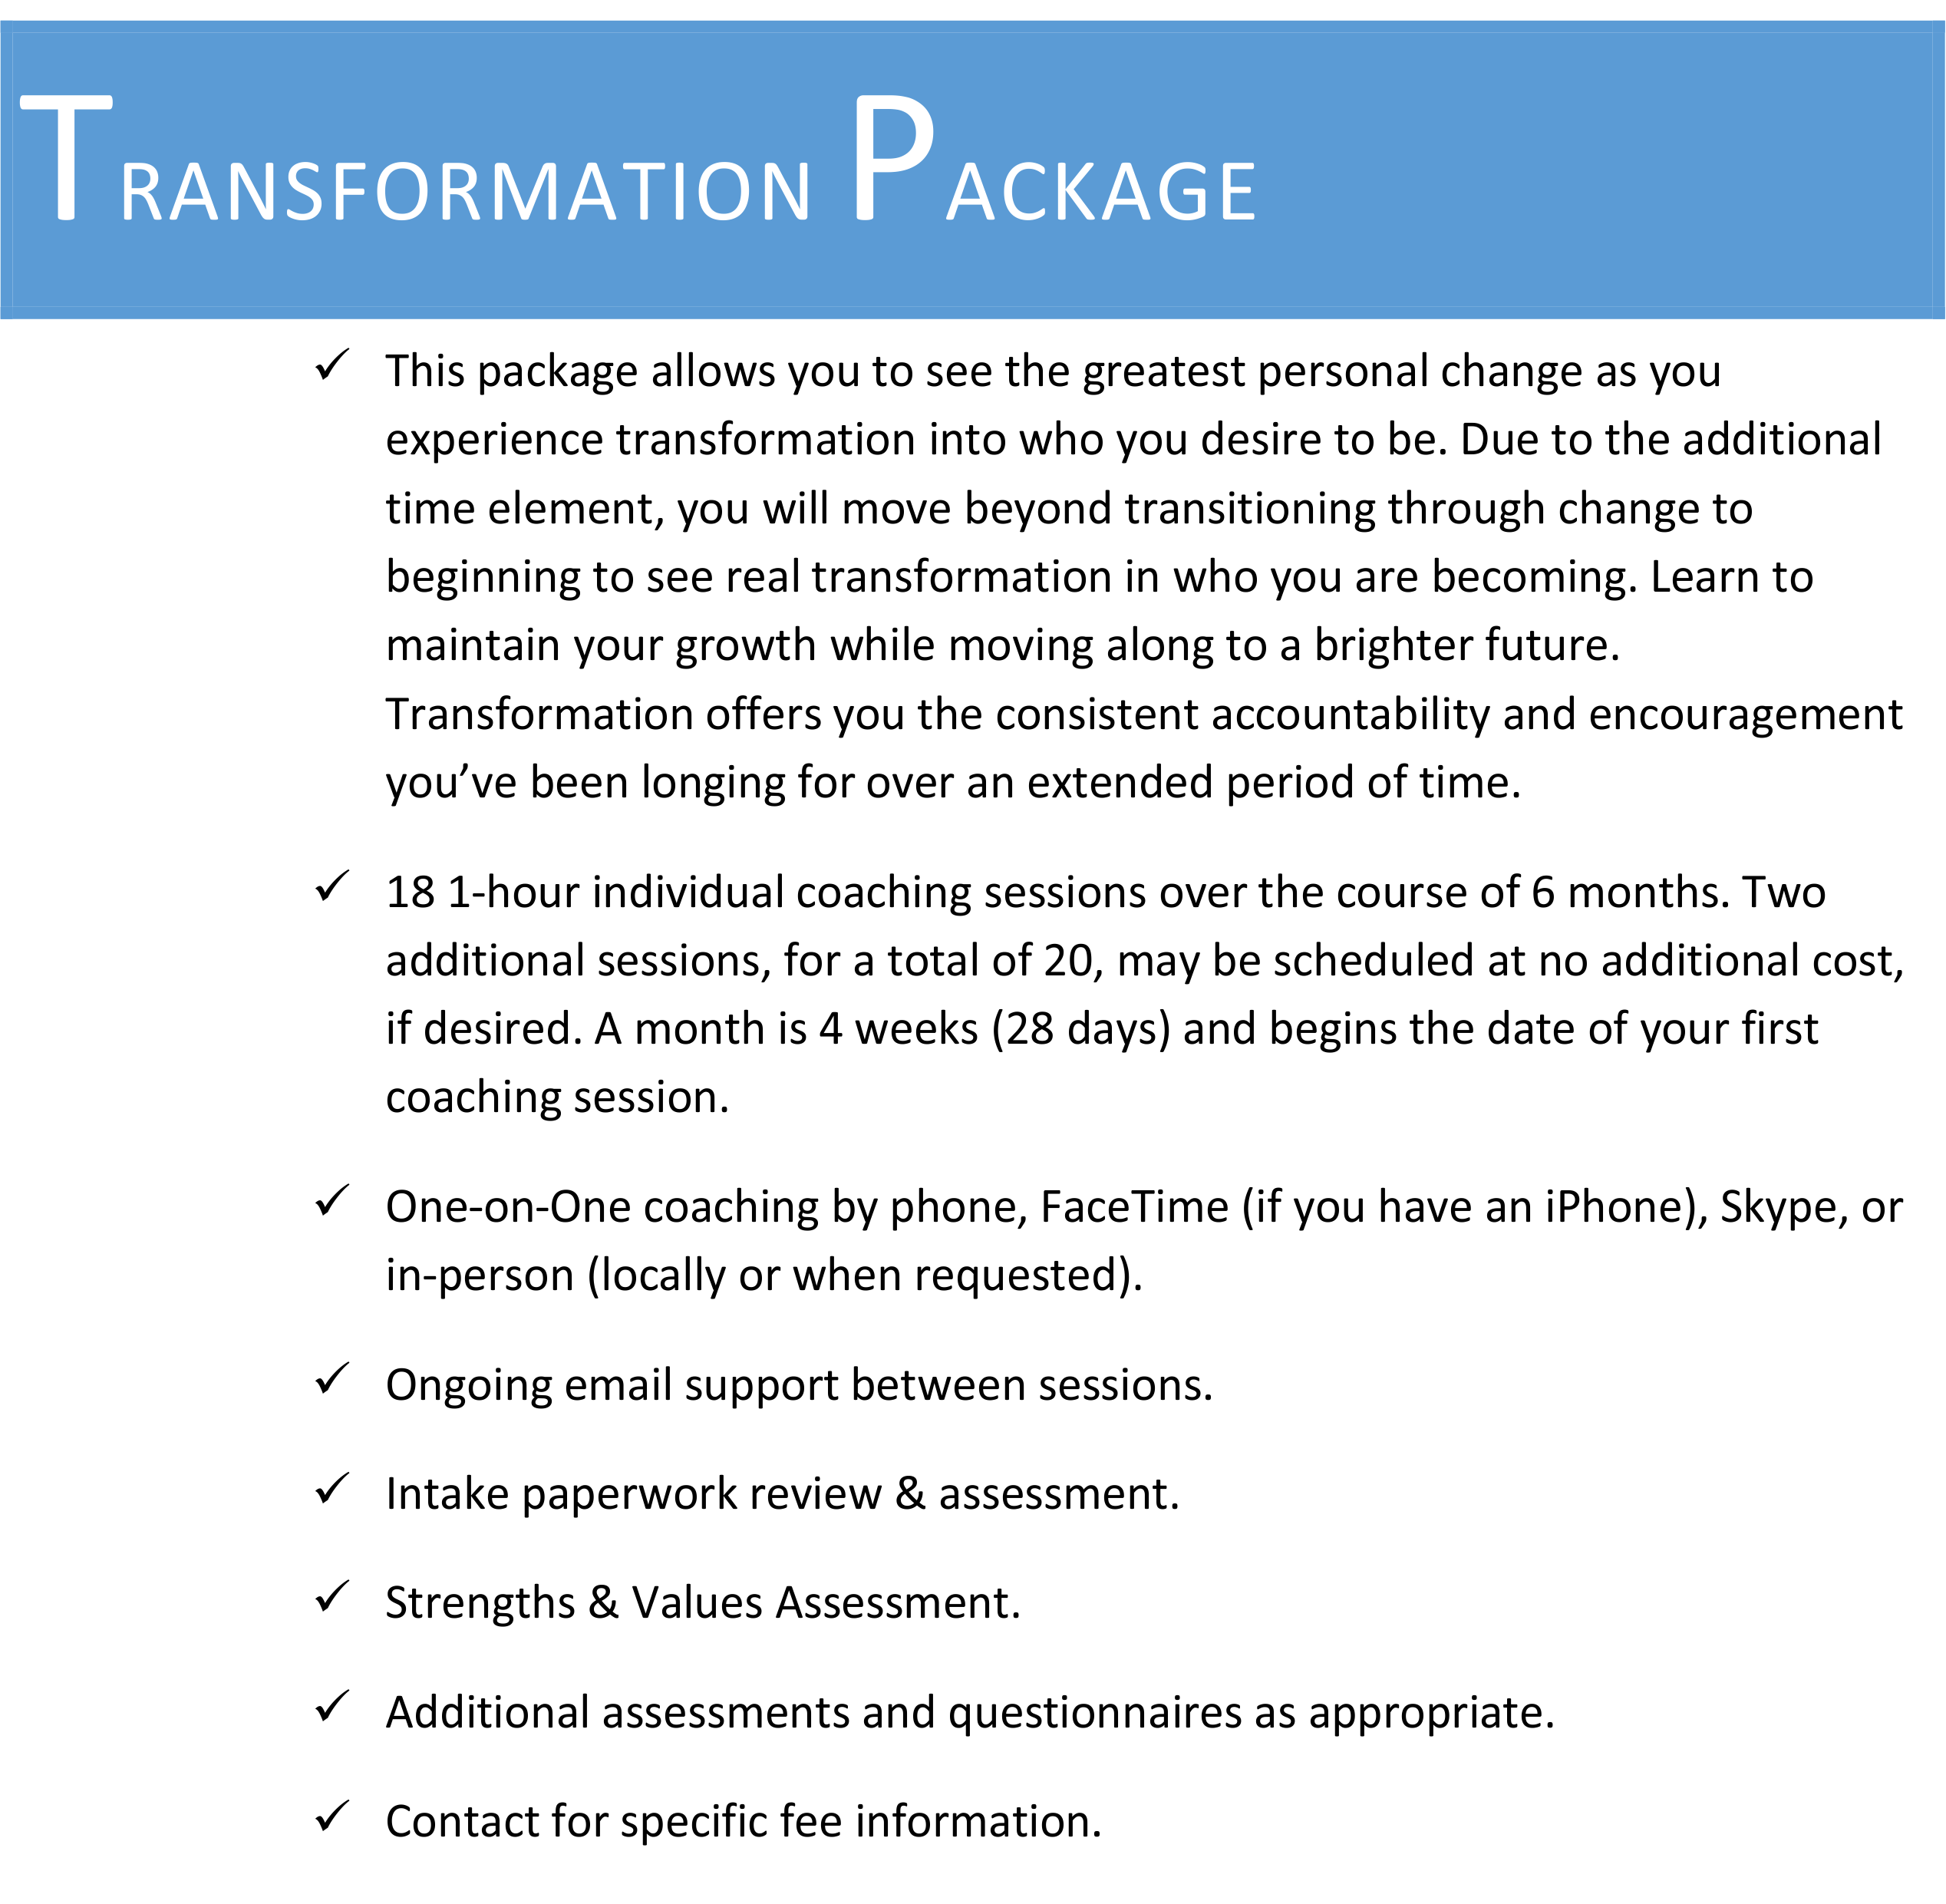 transformation package details